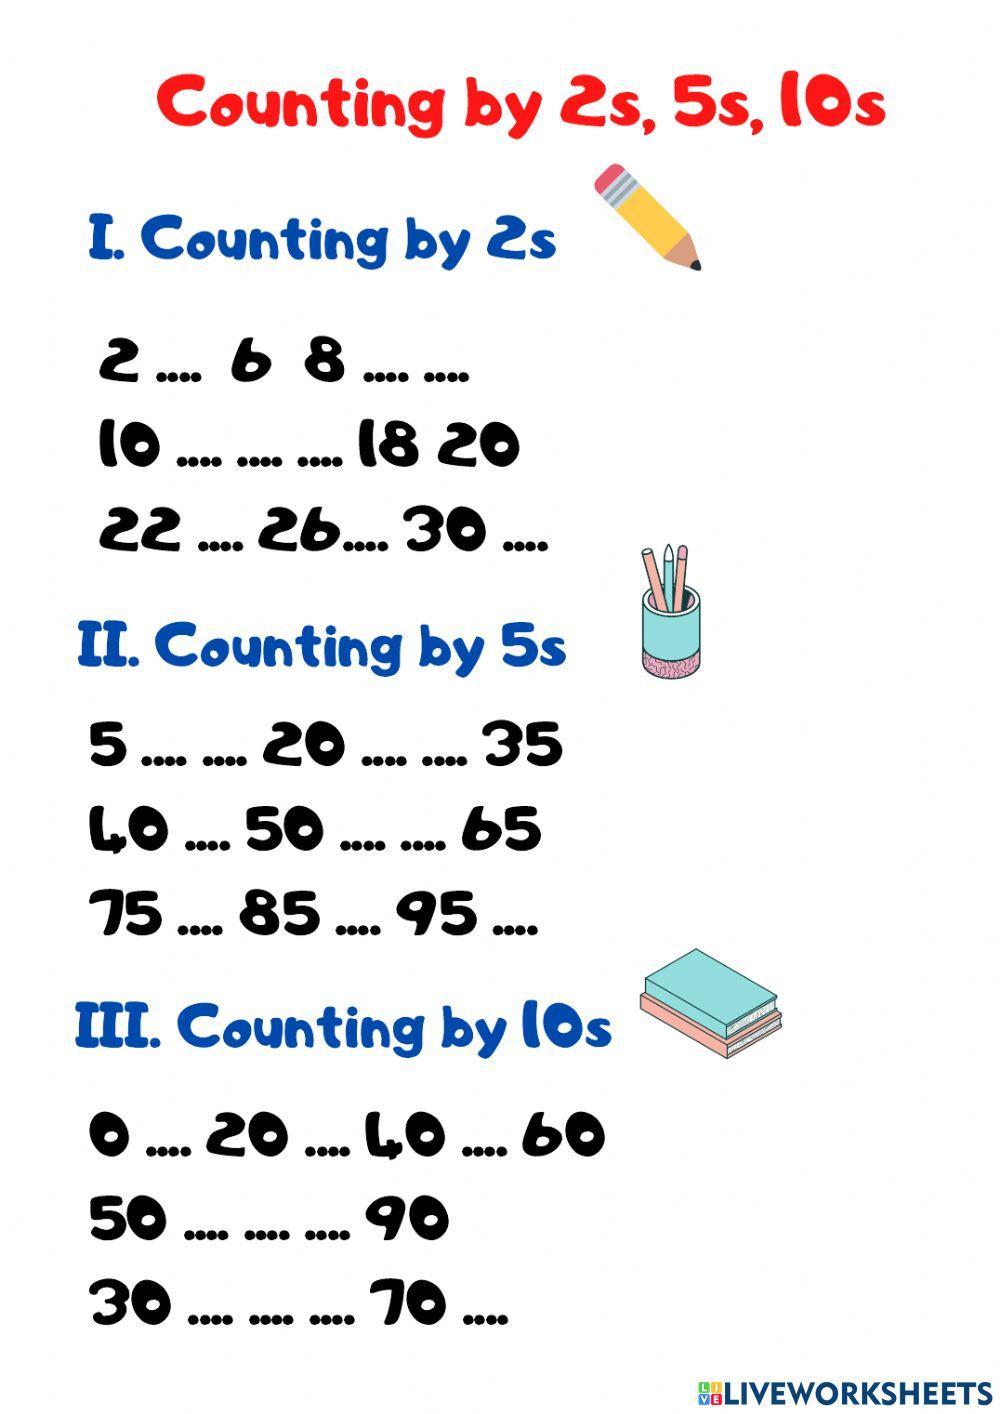 Counting by 2s,5s,10s